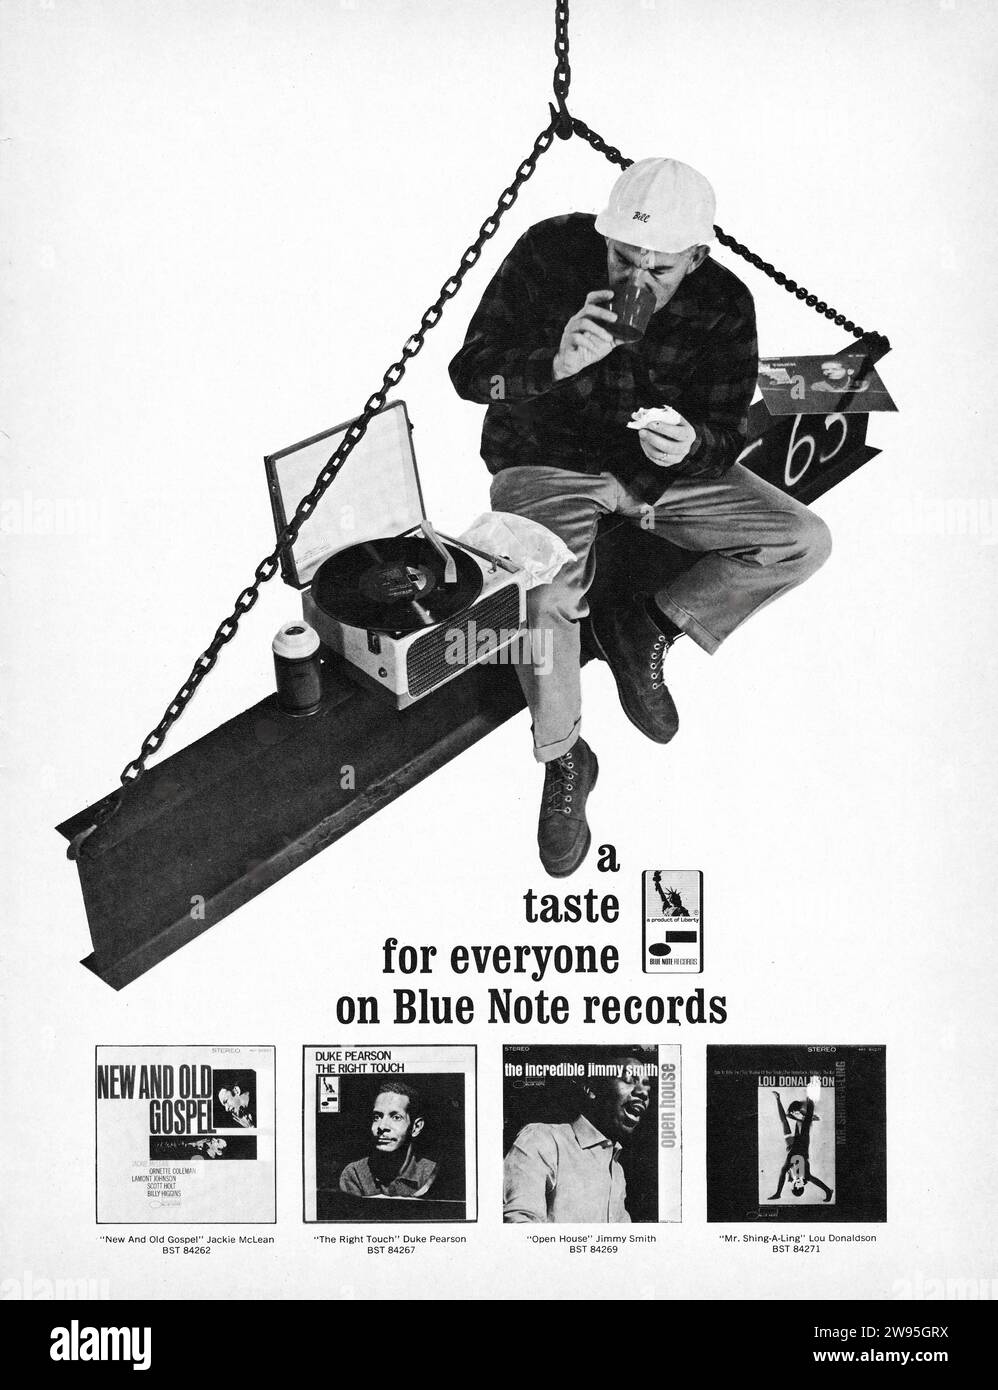 An advertisement for Blue Note records replicating the famous photo of construction workers called Lunch Atop a Skyscraper. From a 1960s music magazine. Stock Photo